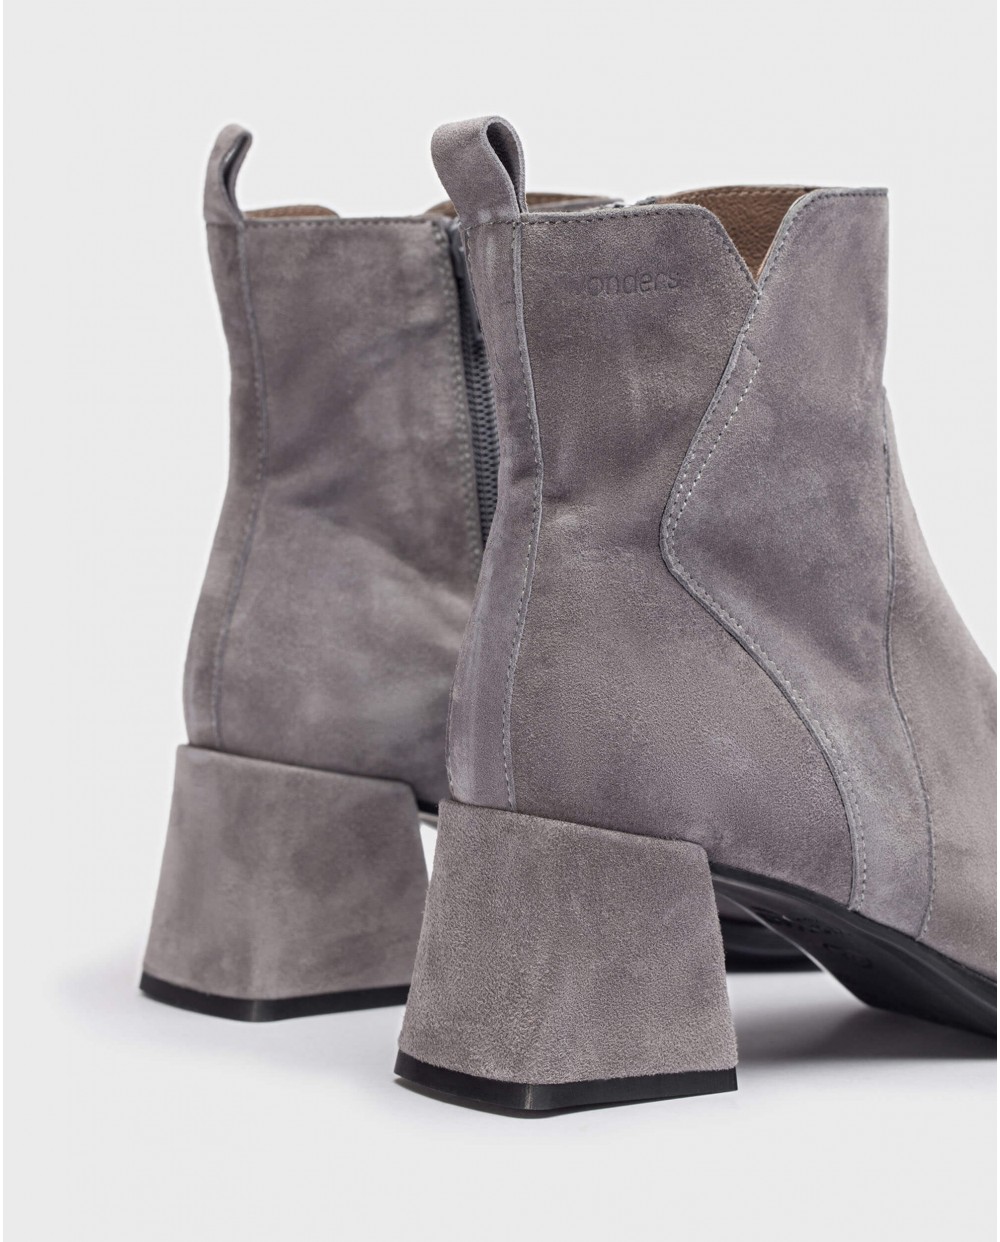 Wonders-Ankle Boots-Grey MARINE ankle boot